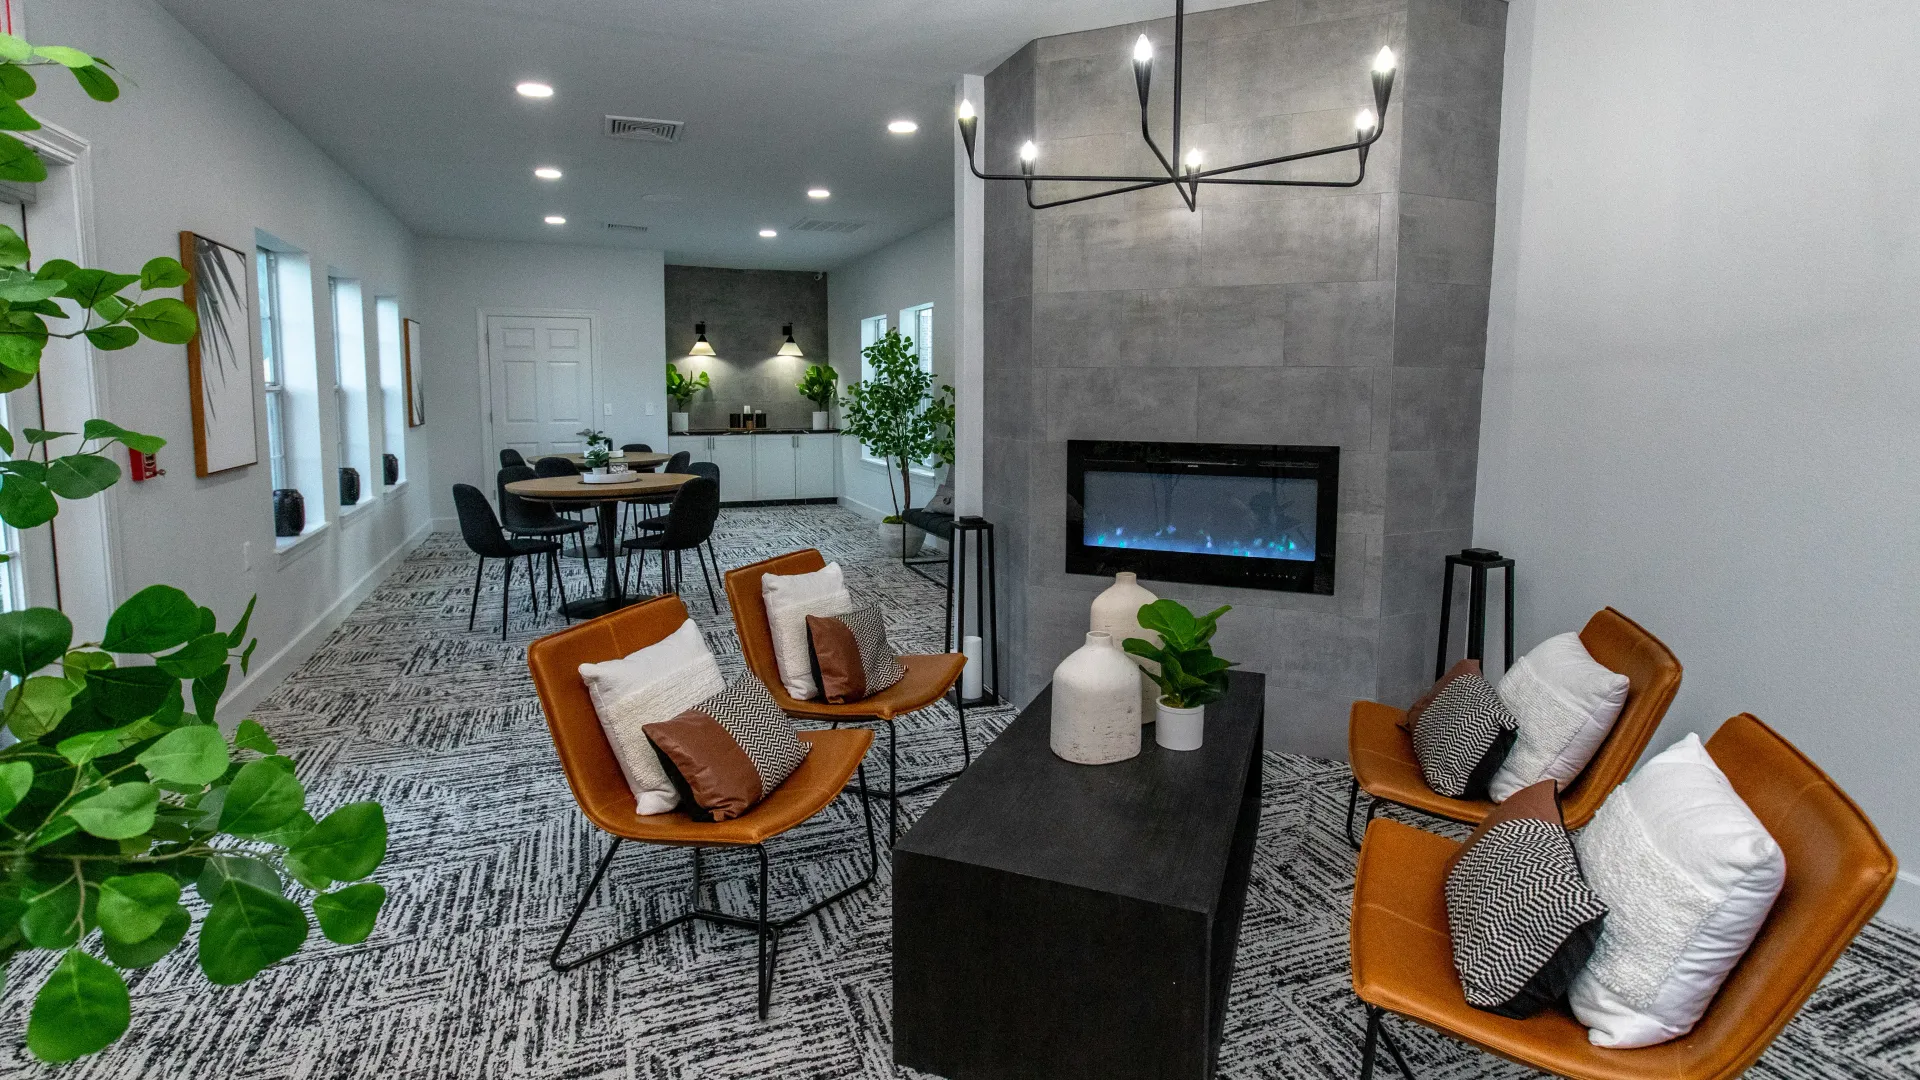 Comfortable leather chairs, centered around an inviting electric fireplace in the clubhouse, creating a warm and sociable atmosphere.